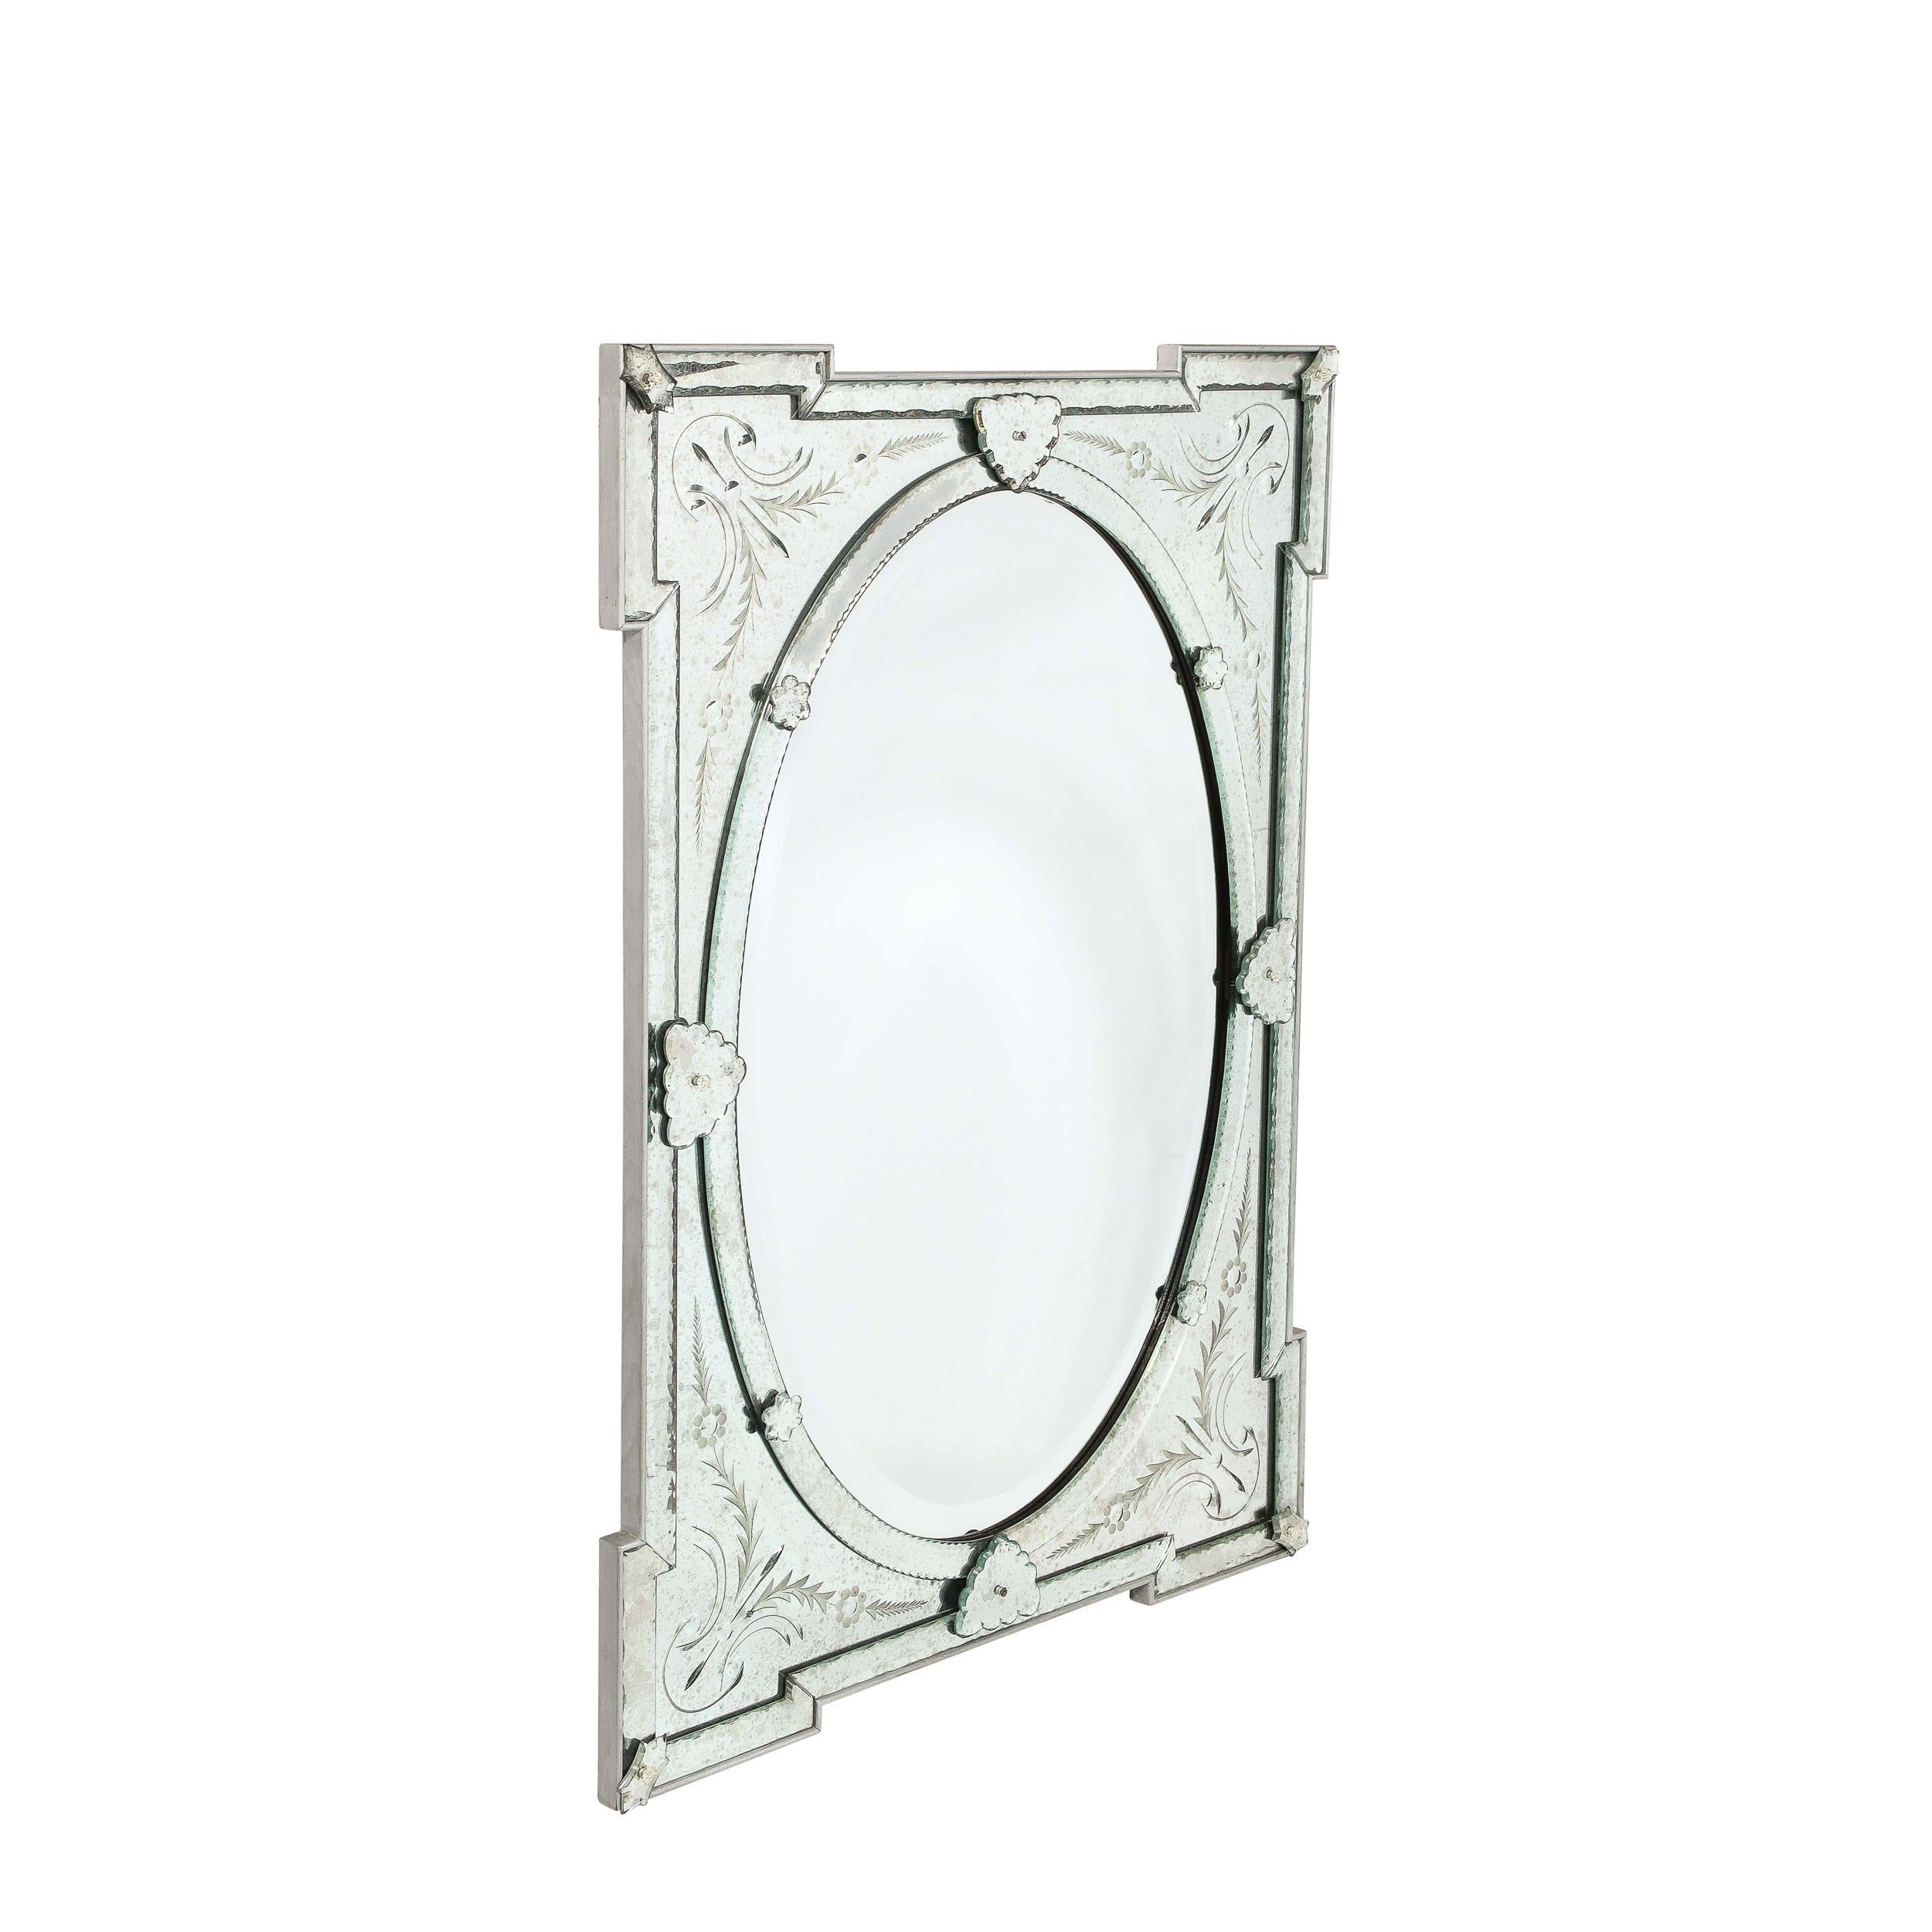 This Mid-Century Modernist Venetian Glass Mirror originates from Italy, Circa 1950. Featuring expanded geometric corners creating space for reversed etched naturalist detailing, the central oval of beveled mirror glass is beautifully proportioned